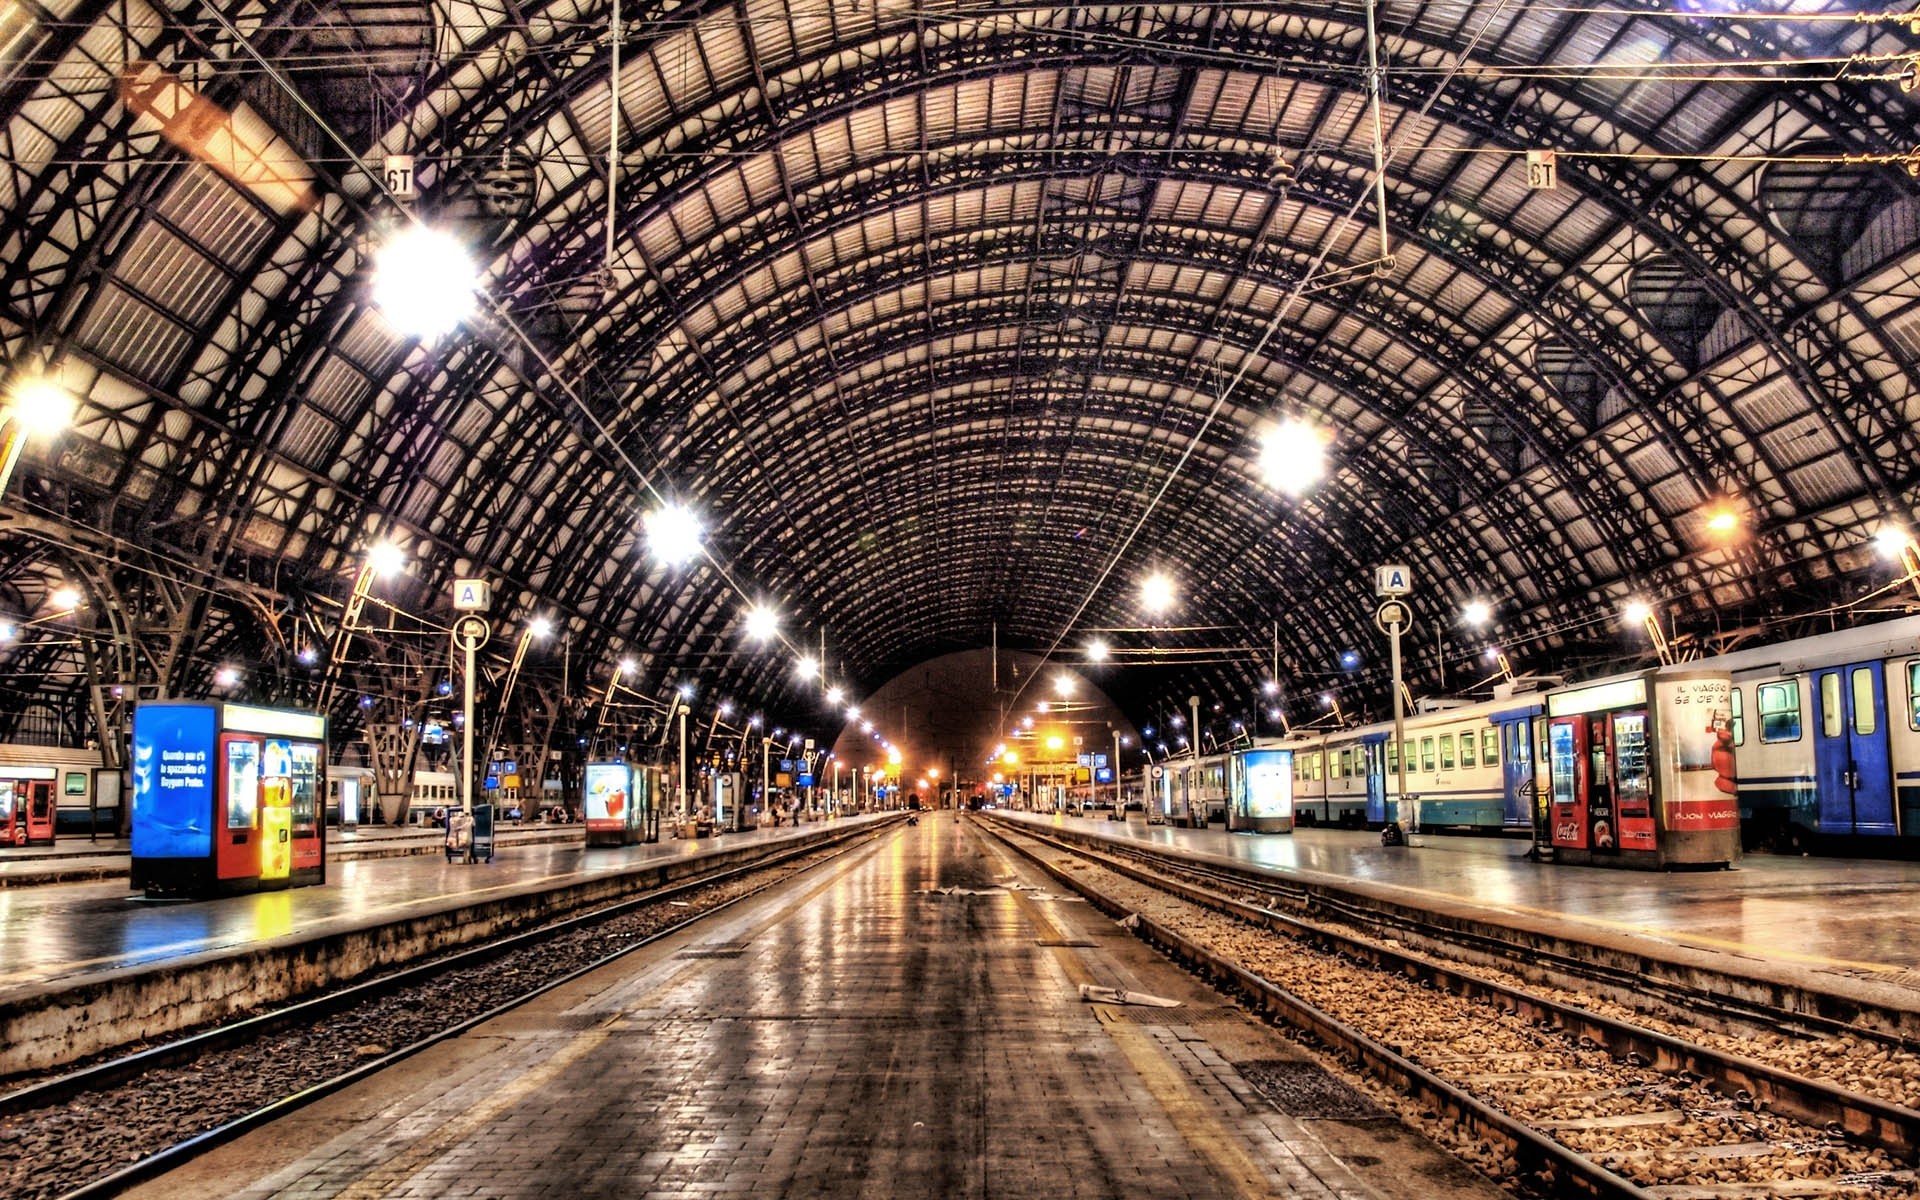 train-station-wallpaper-pictures-49179-50841-hd-wallpapers